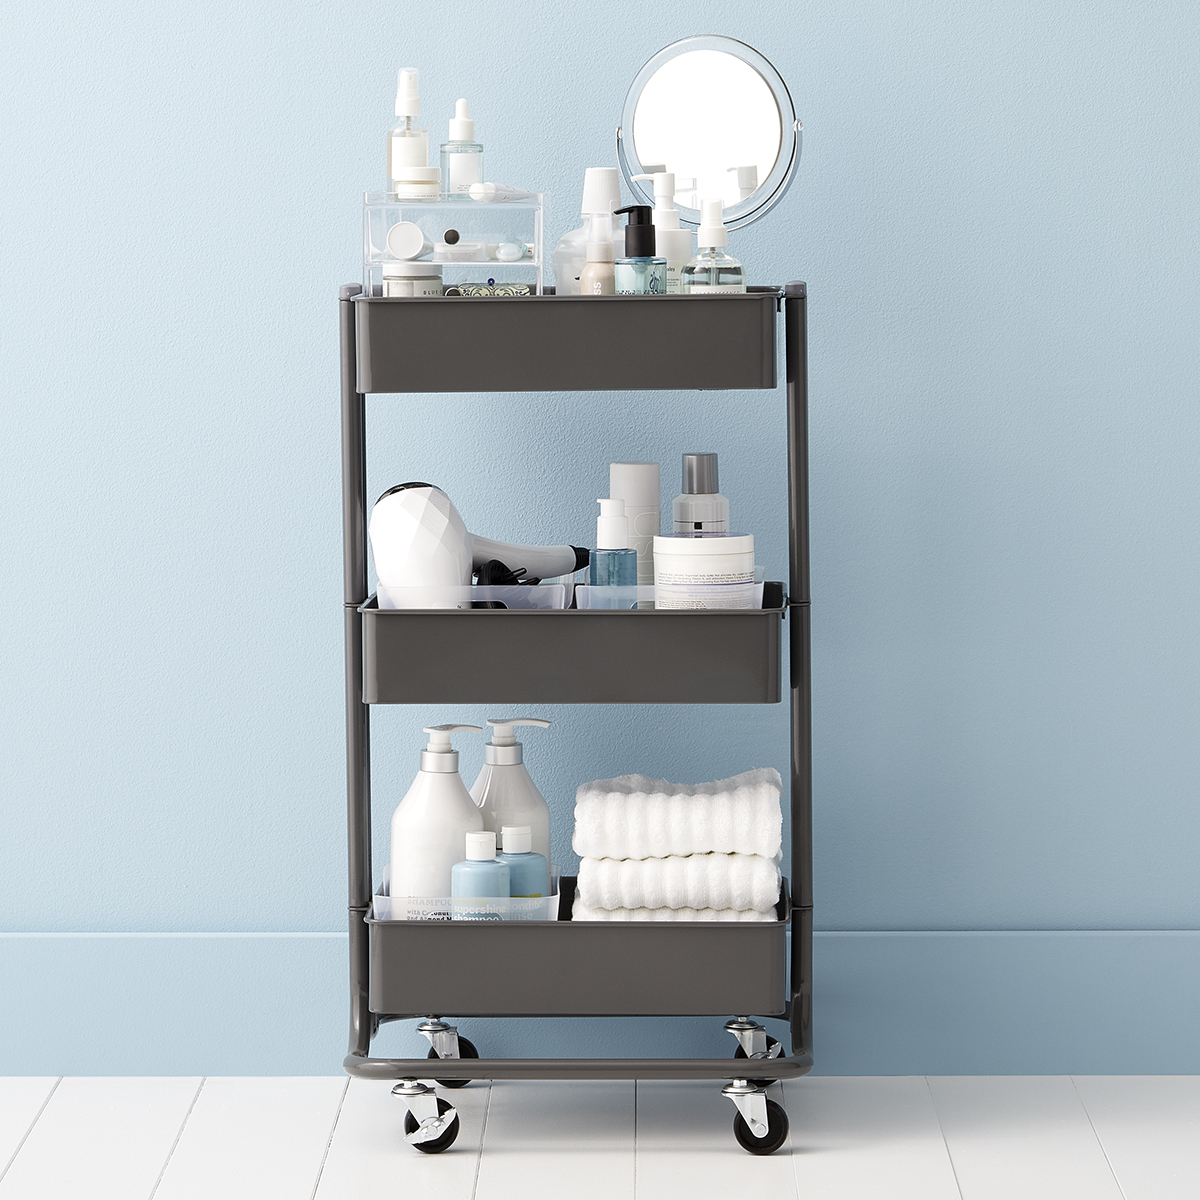 https://www.containerstore.com/catalogimages/365430/CG_19-10076839-3-Tier-Rolling-Cart-G.jpg